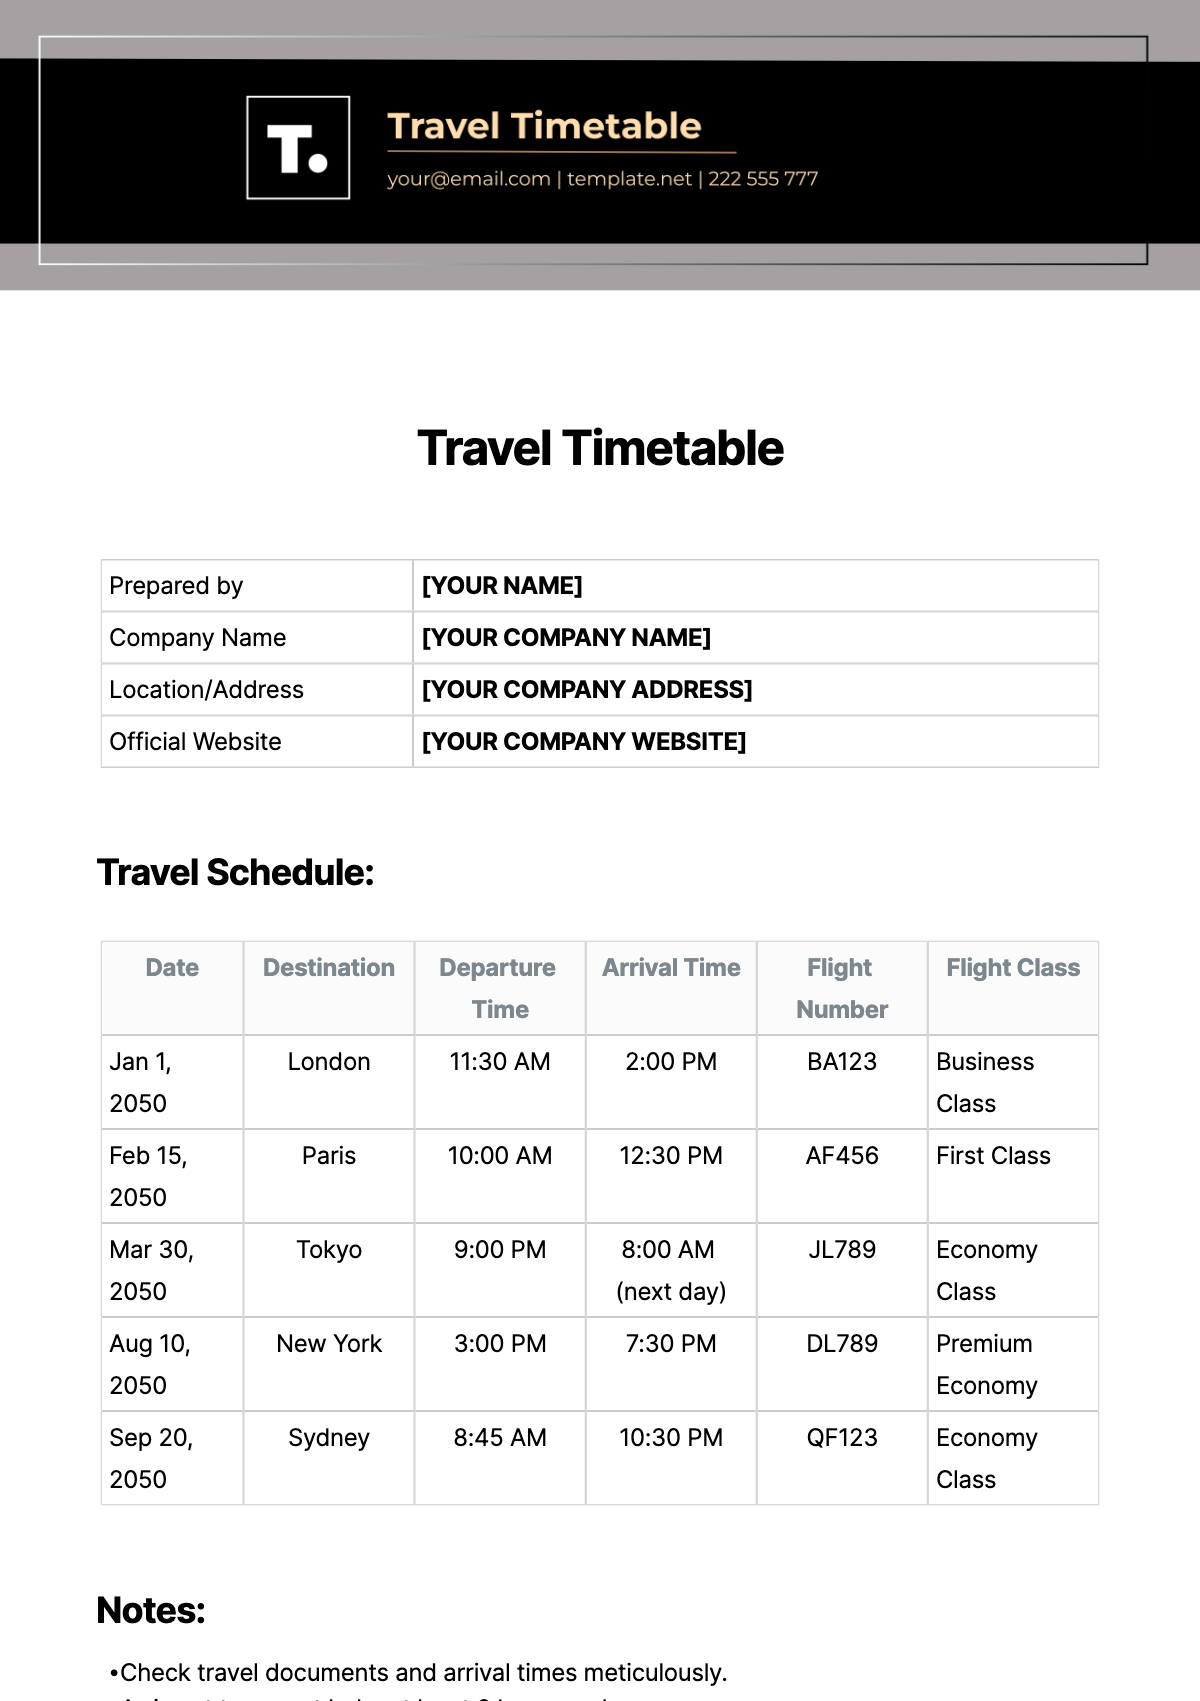 Travel Timetable Template